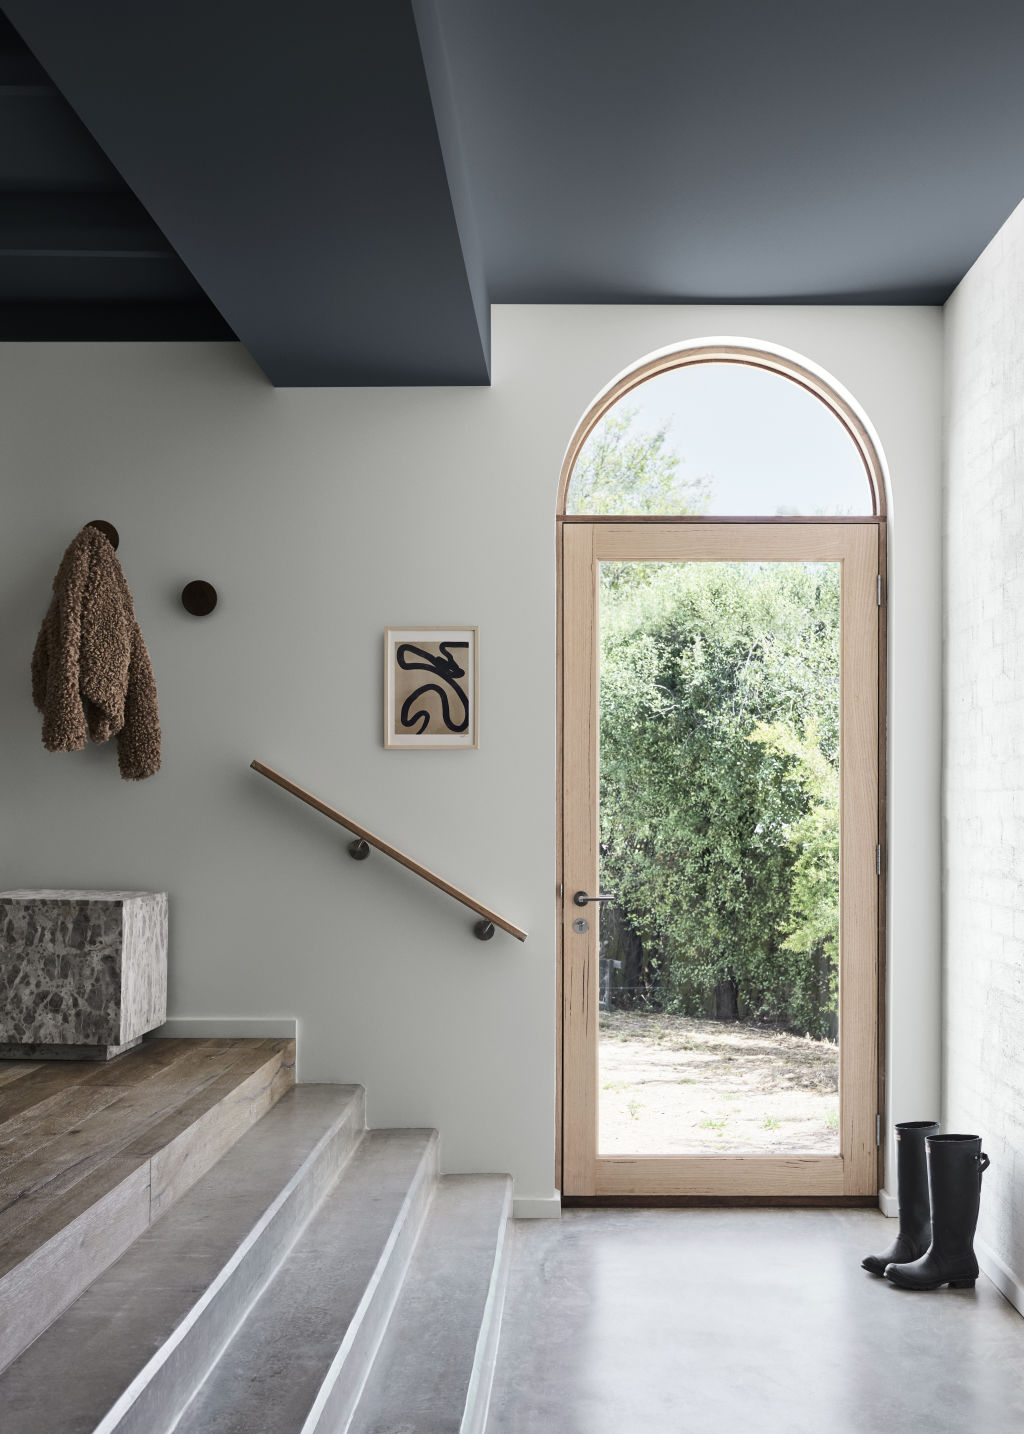 When it comes to maximum impact, painting your interior is certainly the place to start. Stylist: Bree Leech. Photo: Lisa Cohen for Dulux Australia